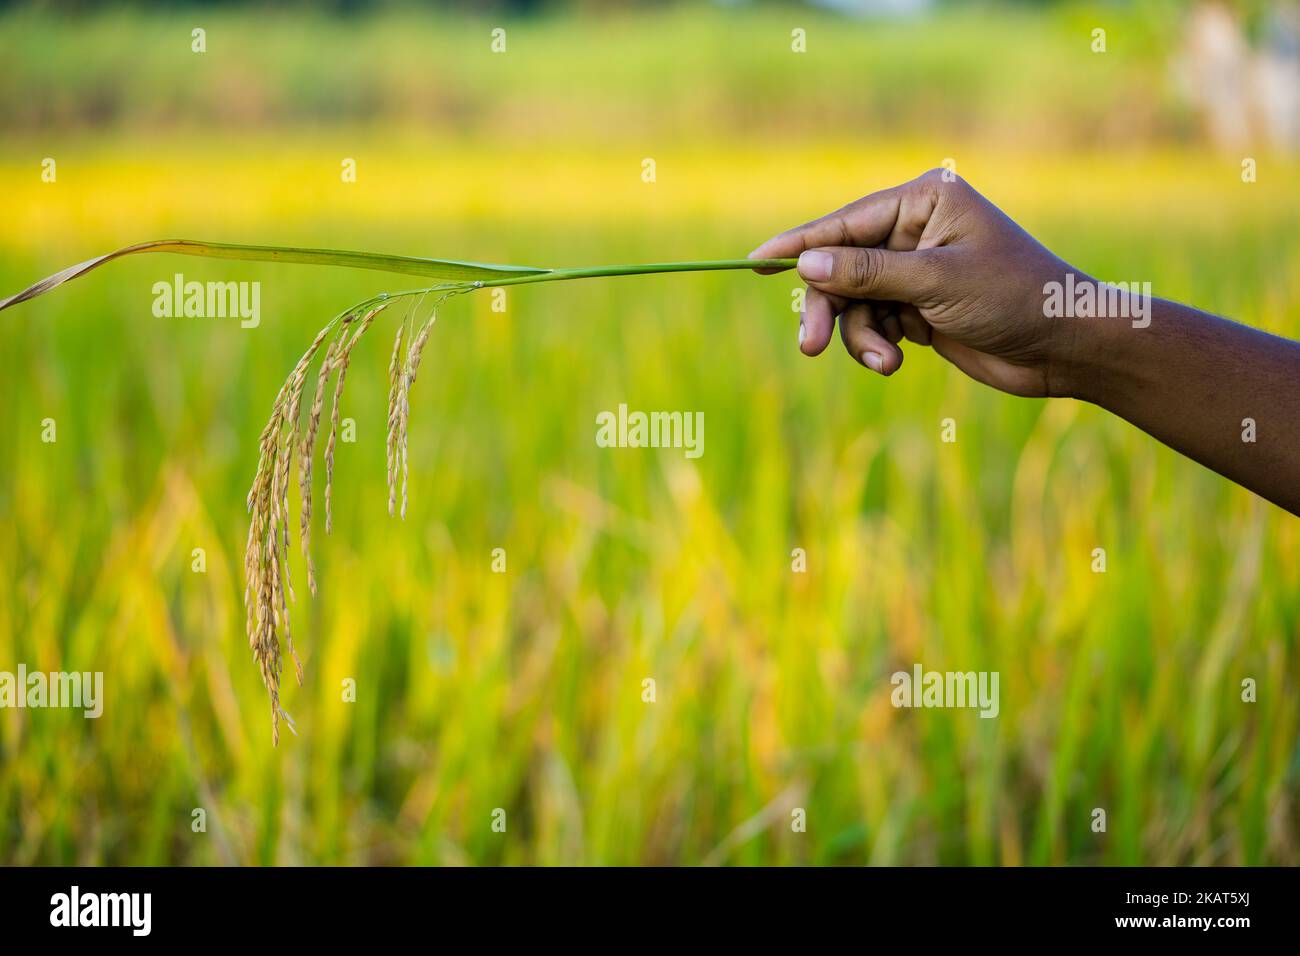 Ripe rice fields and the farm Stock Photo